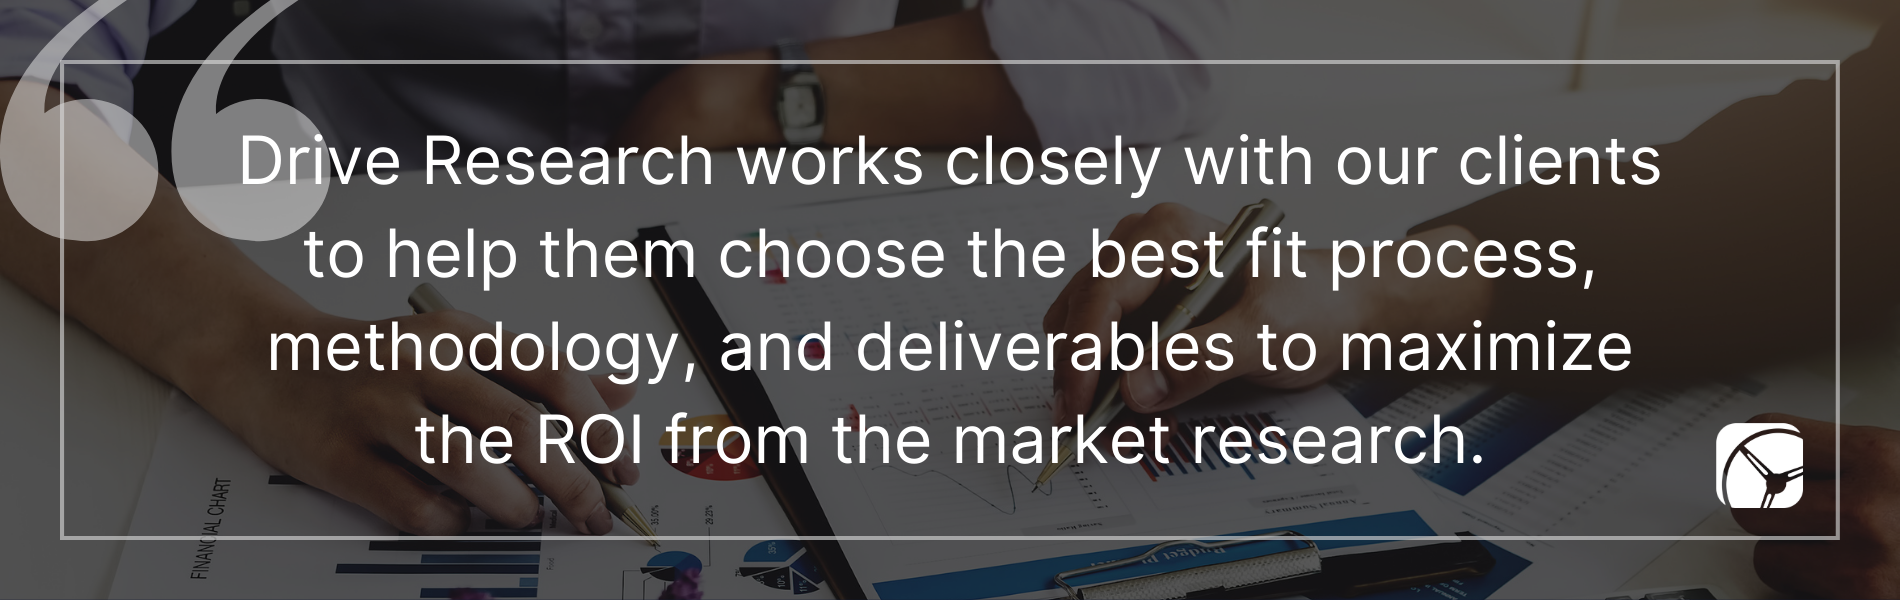 Drive Research works closely with our clients to help them choose the best fit process, methodology, and deliverables to maximize the ROI from the market research.